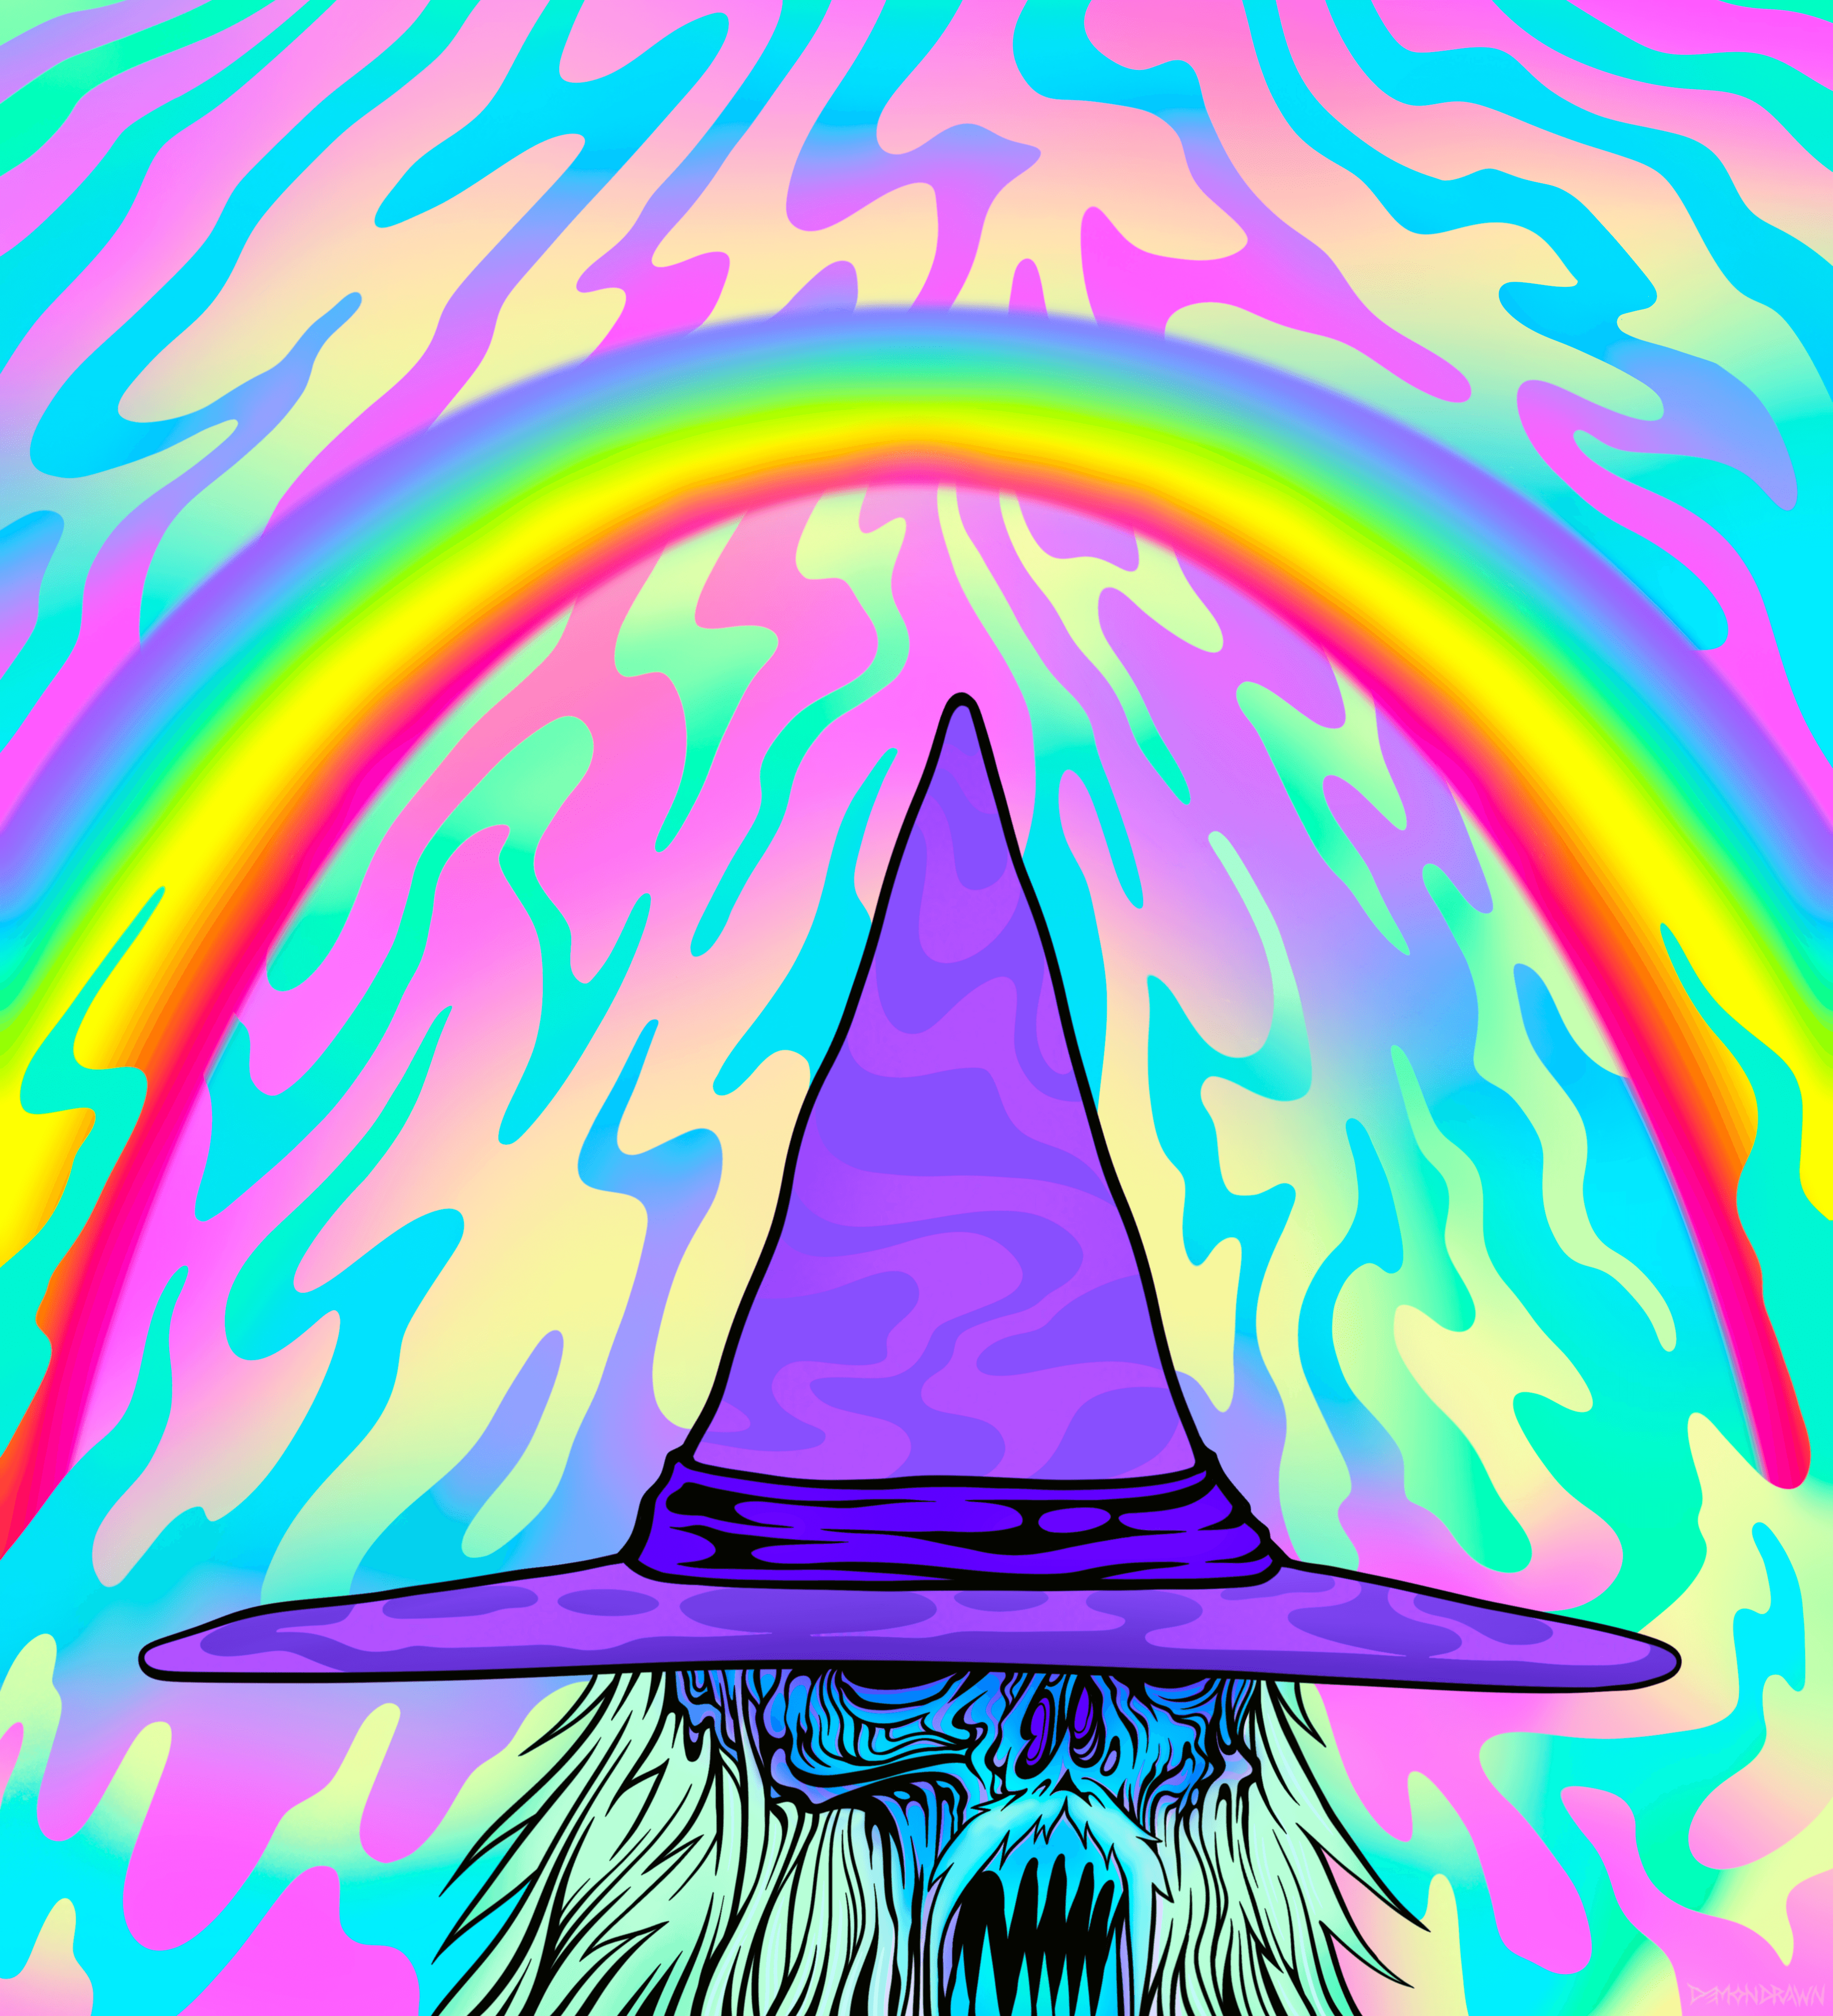 A Visit to the Rainbow Dimension